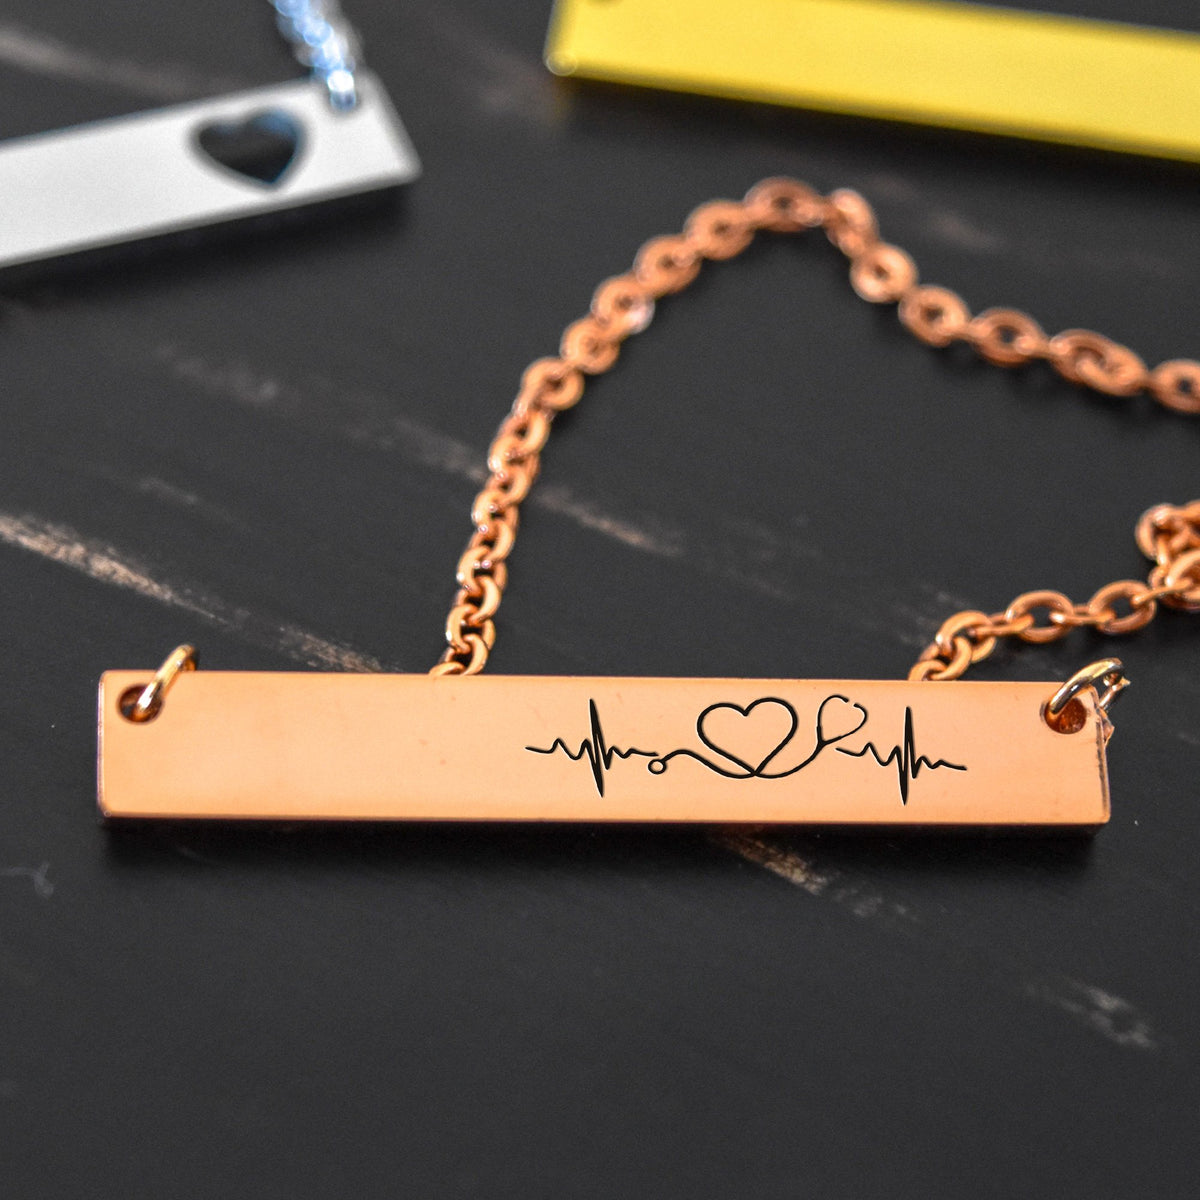 NurseHeartBeat Cancer Awareness Stay Strong - Engraved Necklace